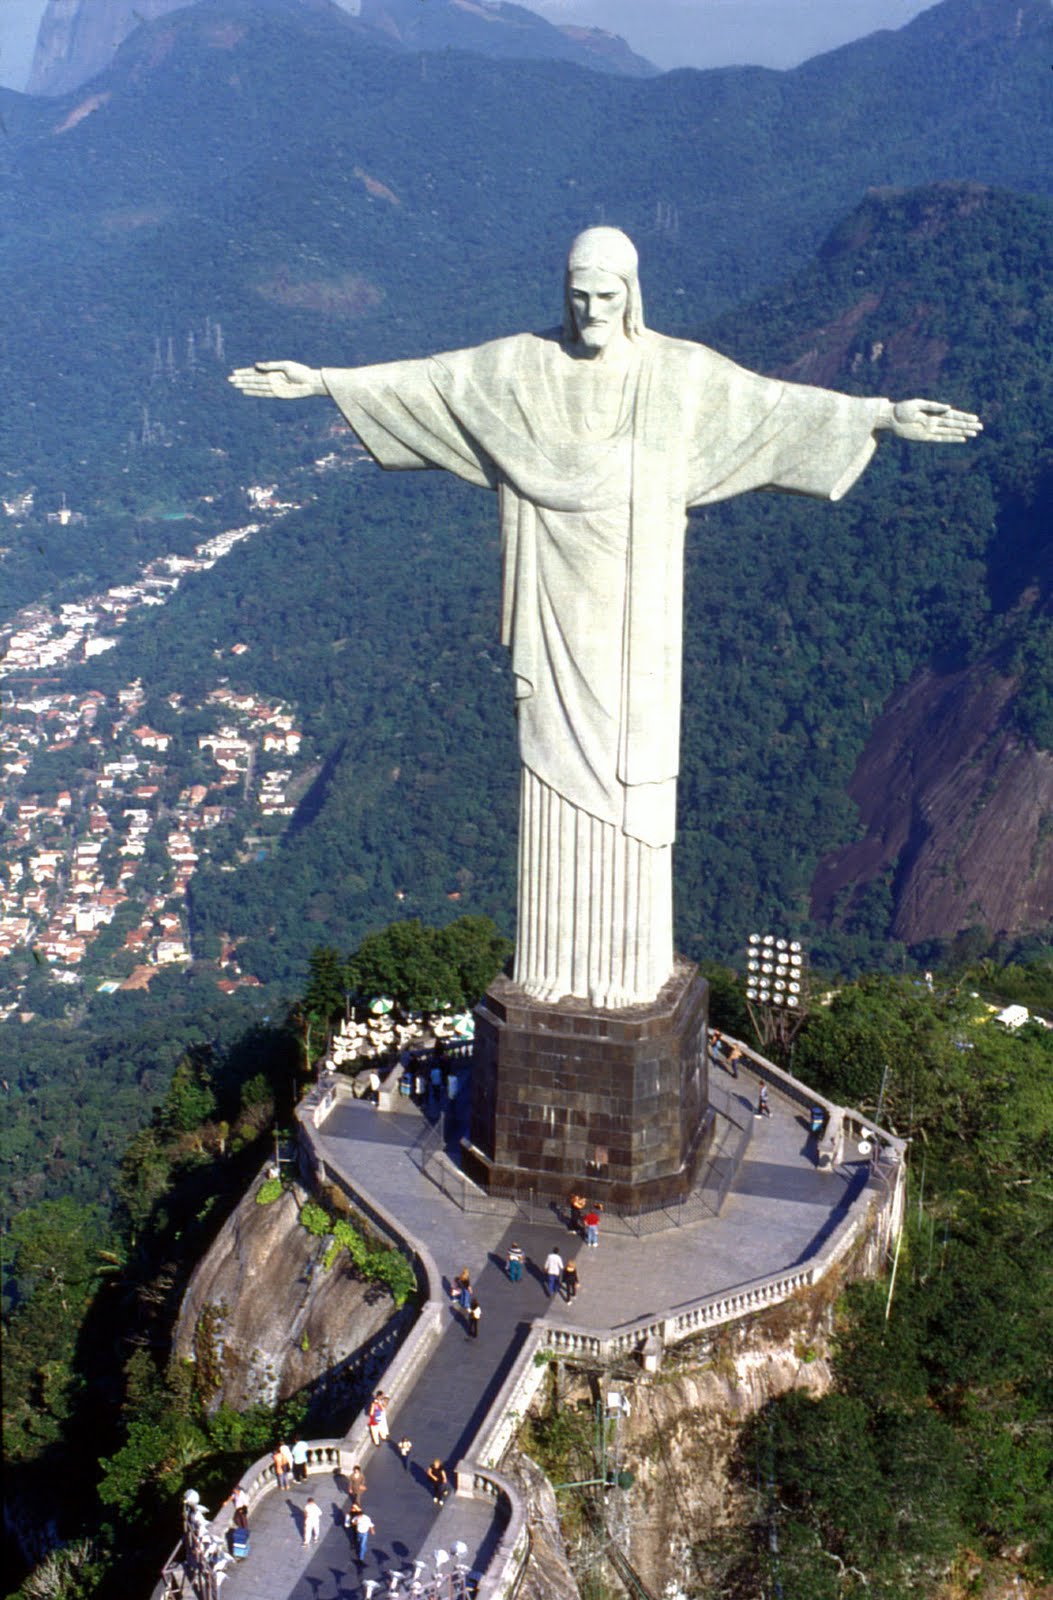 60 Pictures Of Famous Statues In The World